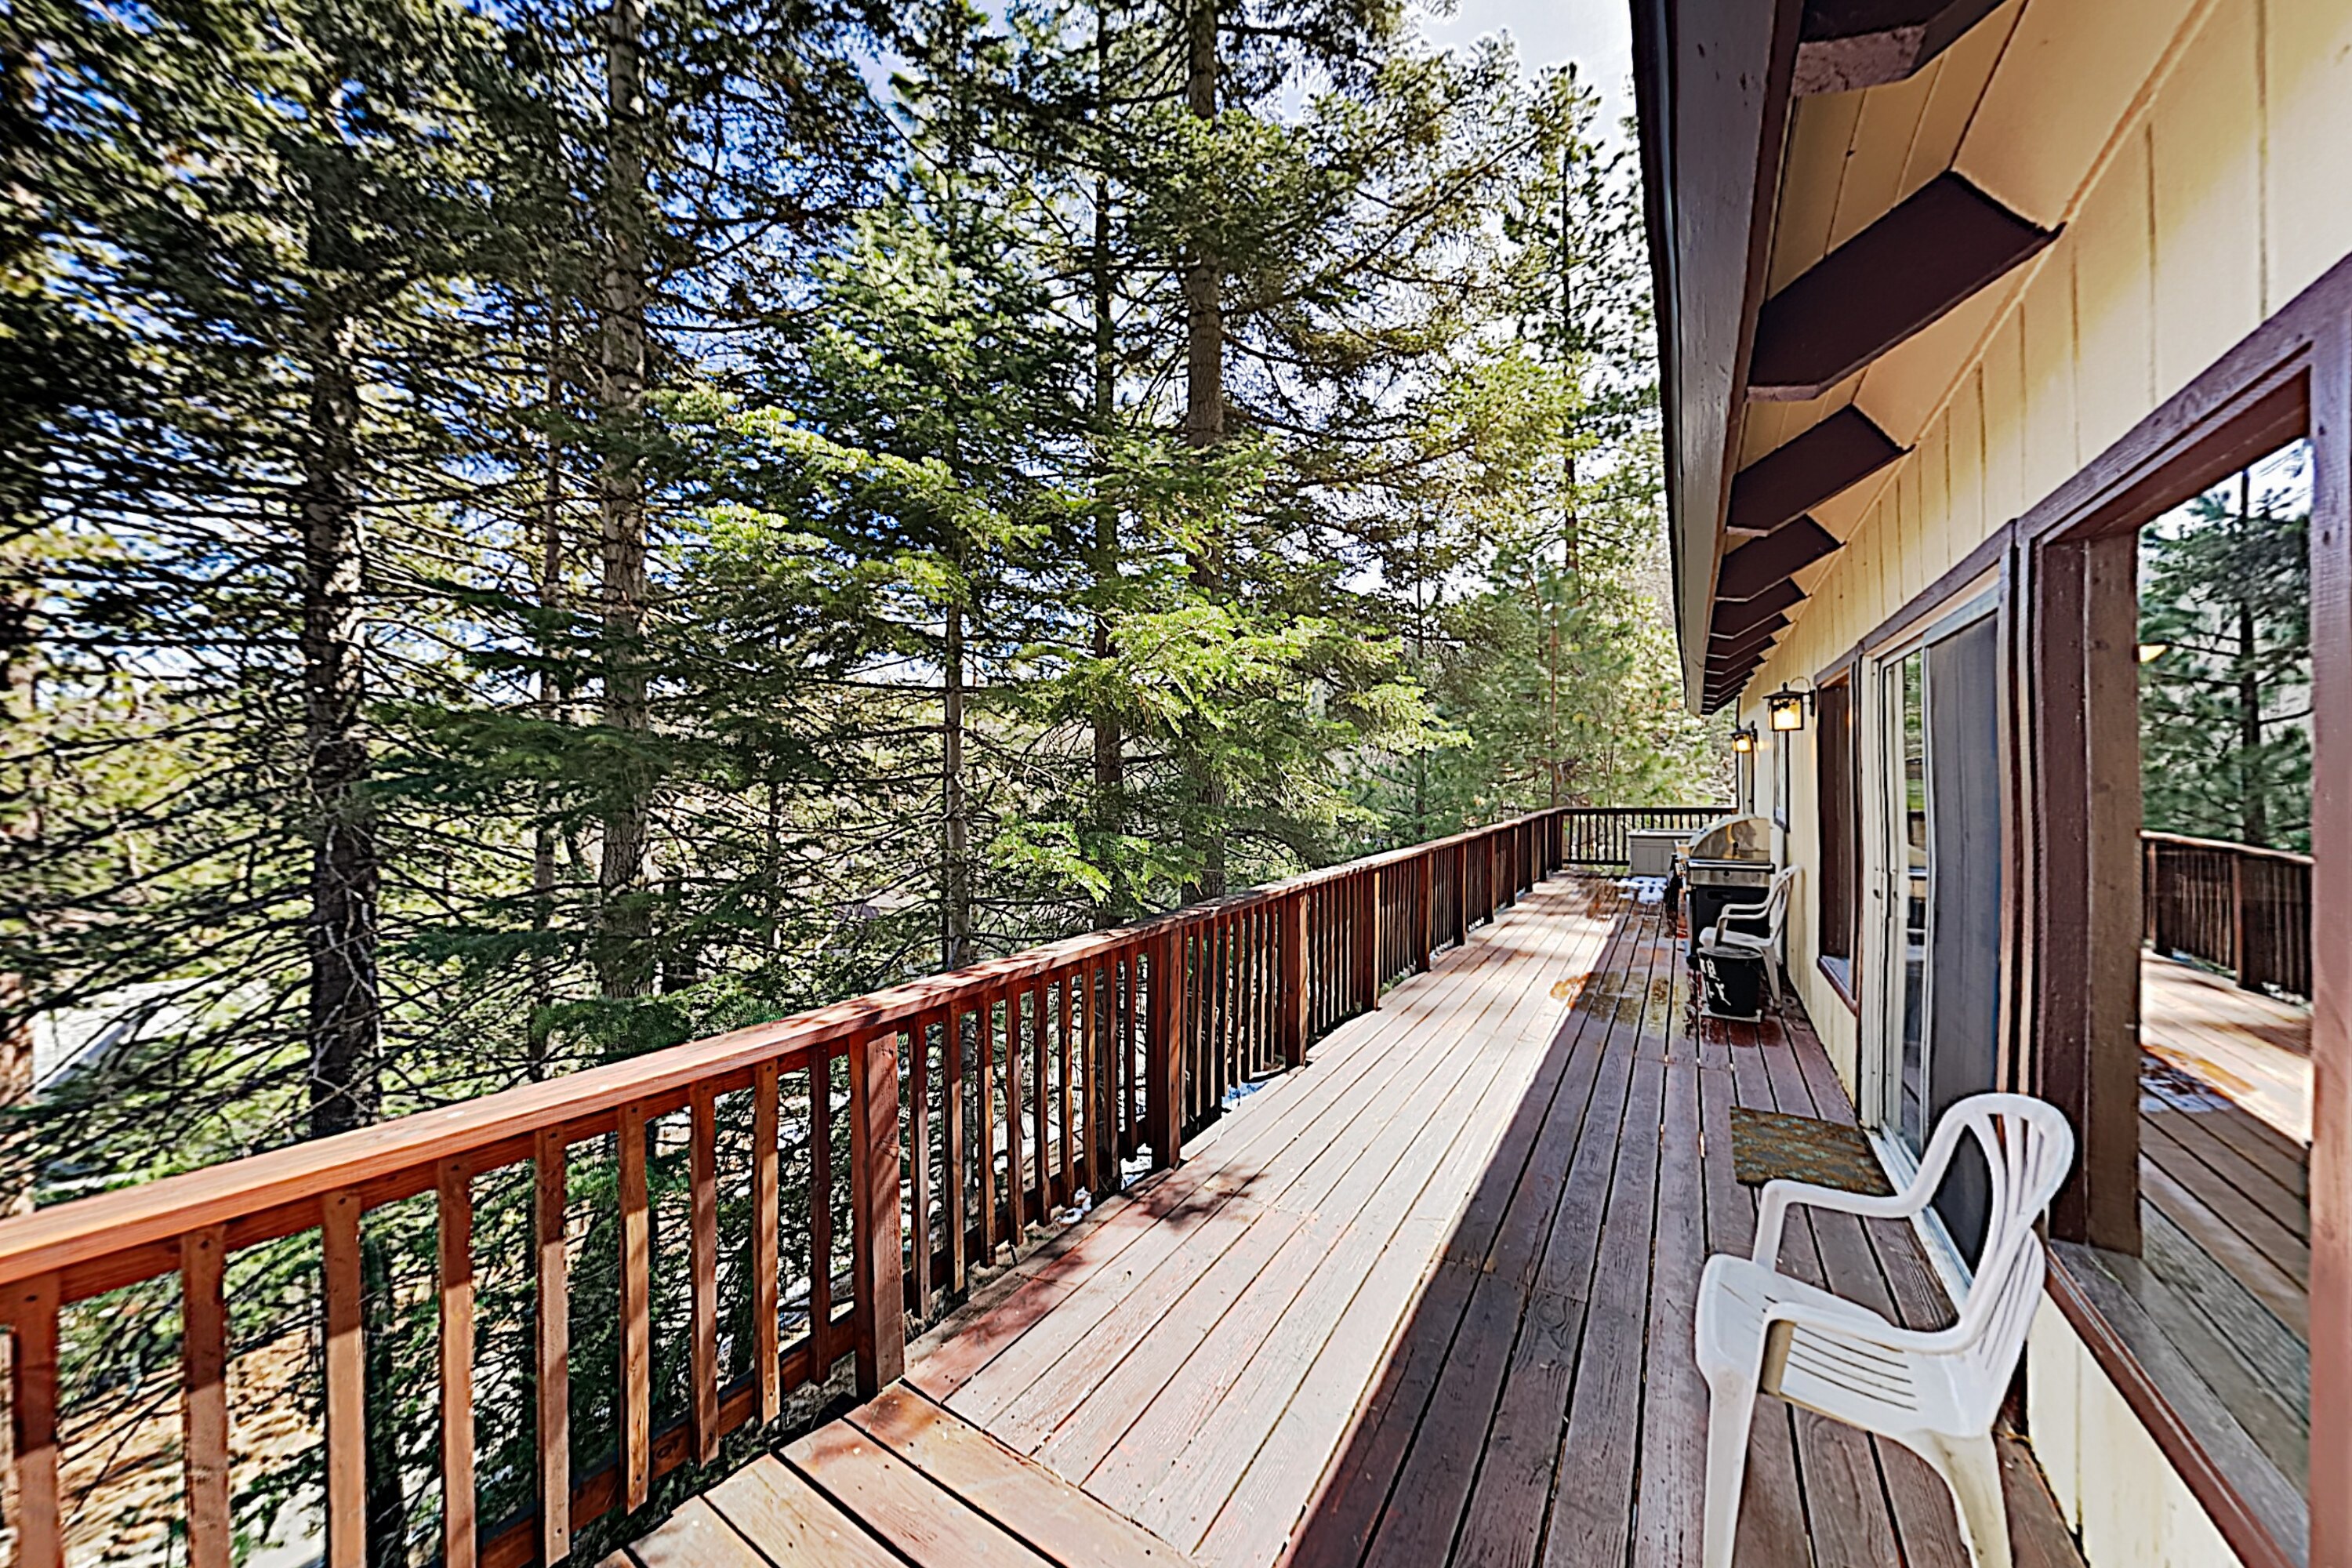 Relax on the spacious deck and look out over the pine trees.